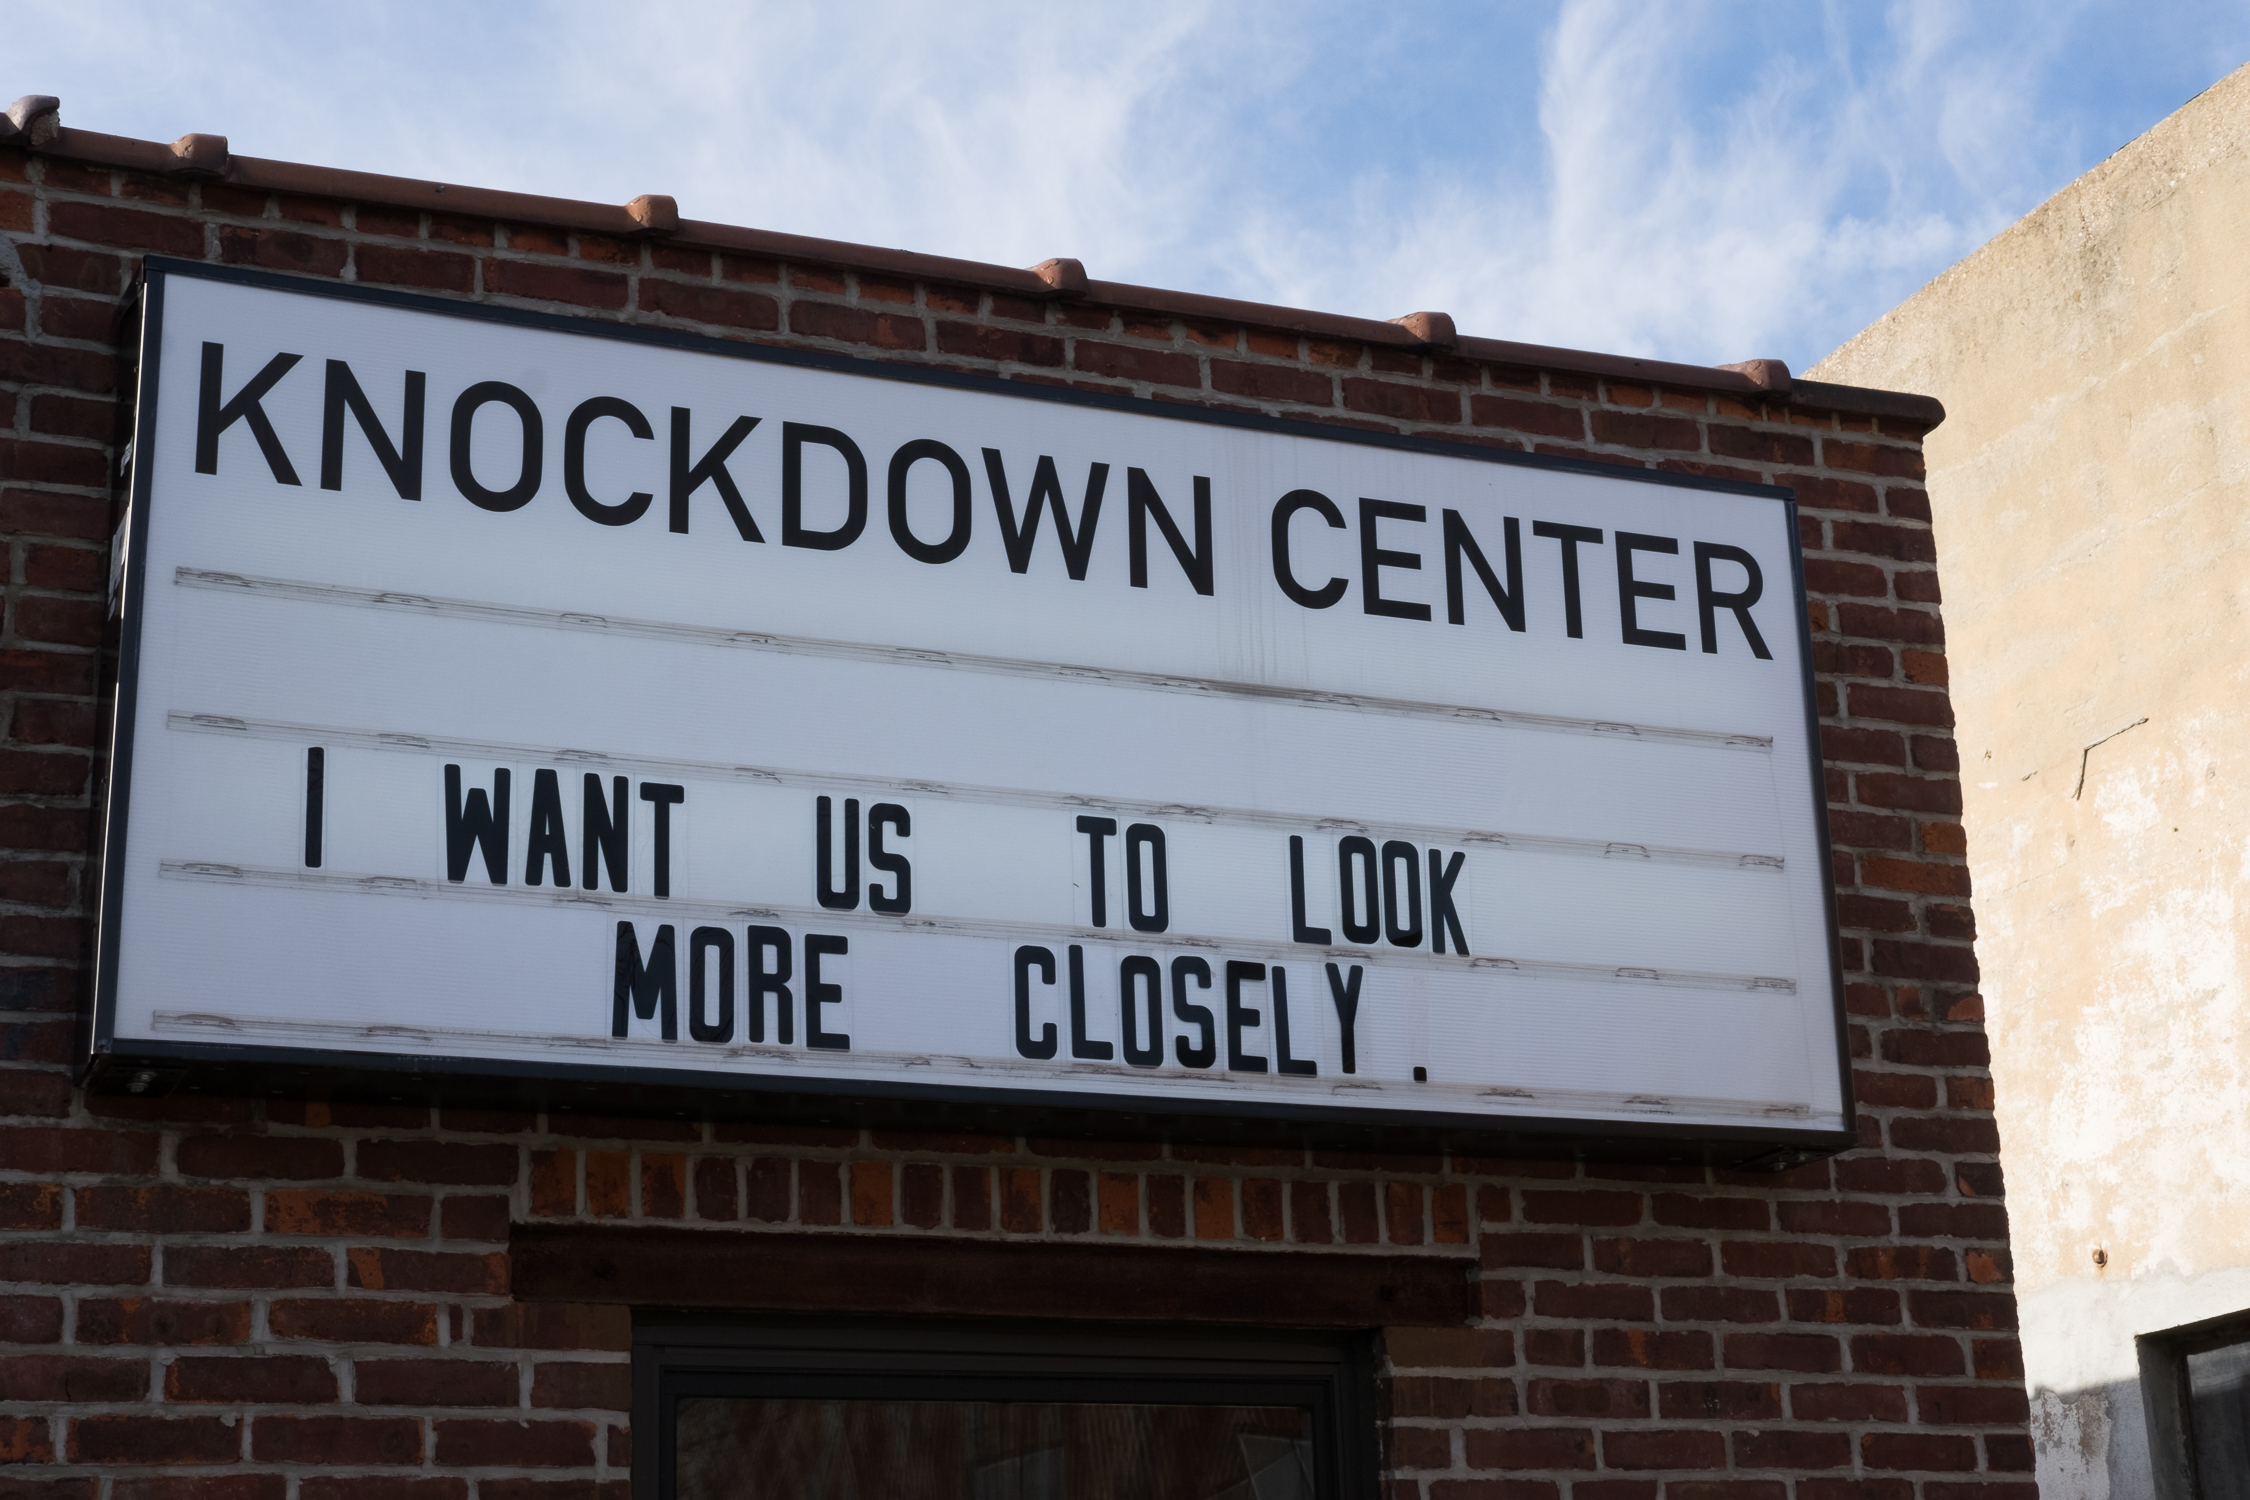 The marquee sign in front of the Knockdown Center reads "I want us to look more closely"